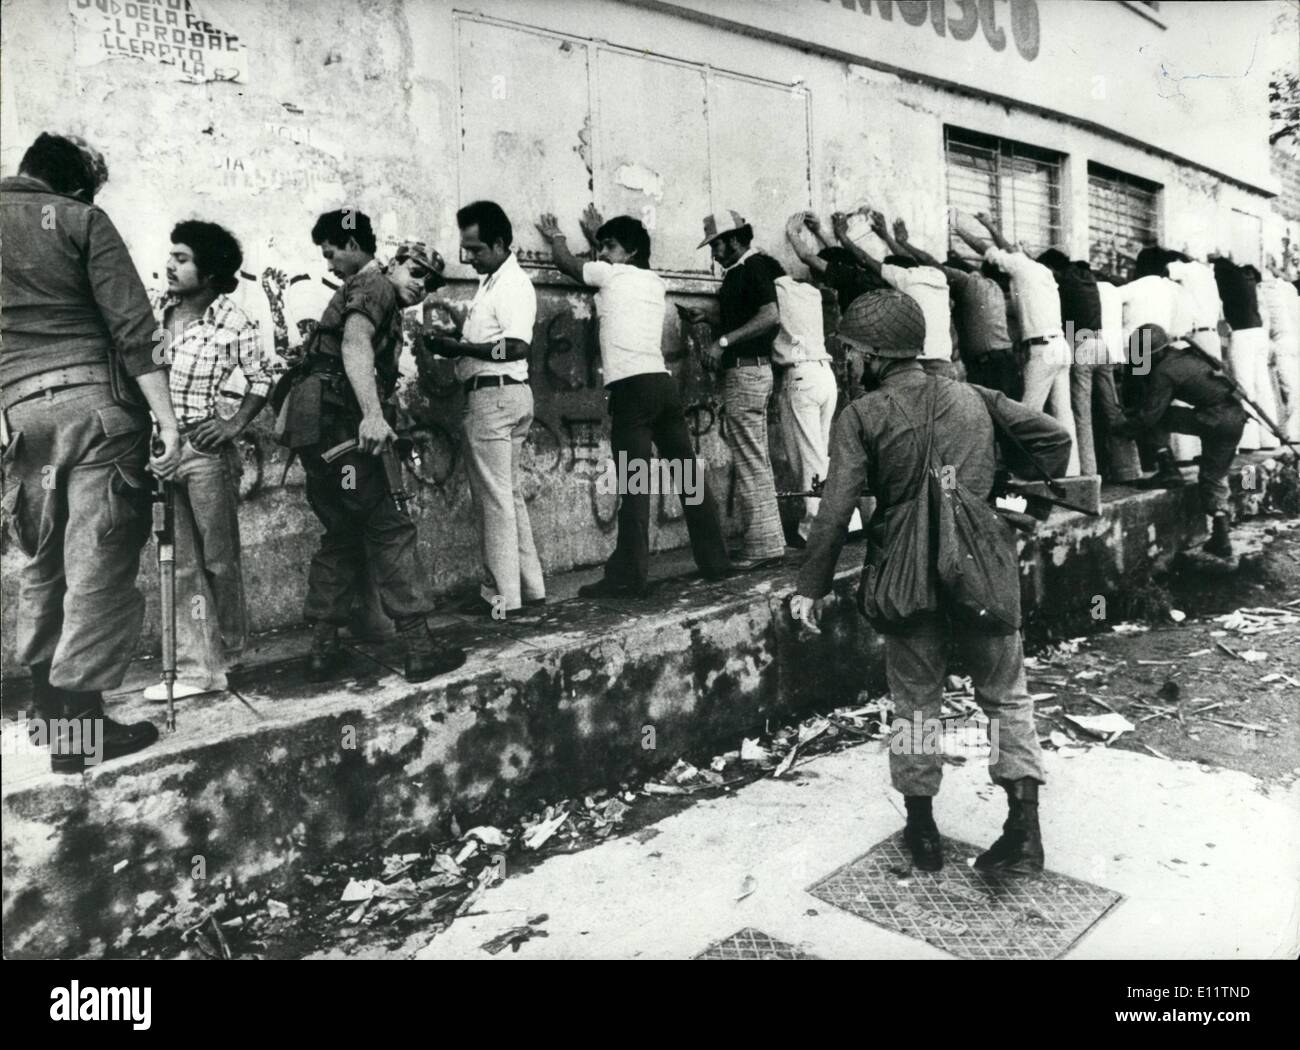 Jul. 07, 1980 - The People Fight the Army in San Salvador: These days, the political situation in E1 Salvador is on the brink of civil war, as more ad more clashes are taking place between the Army and a large part of the people, especially the young students, in which many have been killed during clashes with the army. Photo shows Young people, many of them students being lined up against a wall and searched by members of the E1 Salbadorian Army during unrest in the Capital San Salvador. Stock Photo